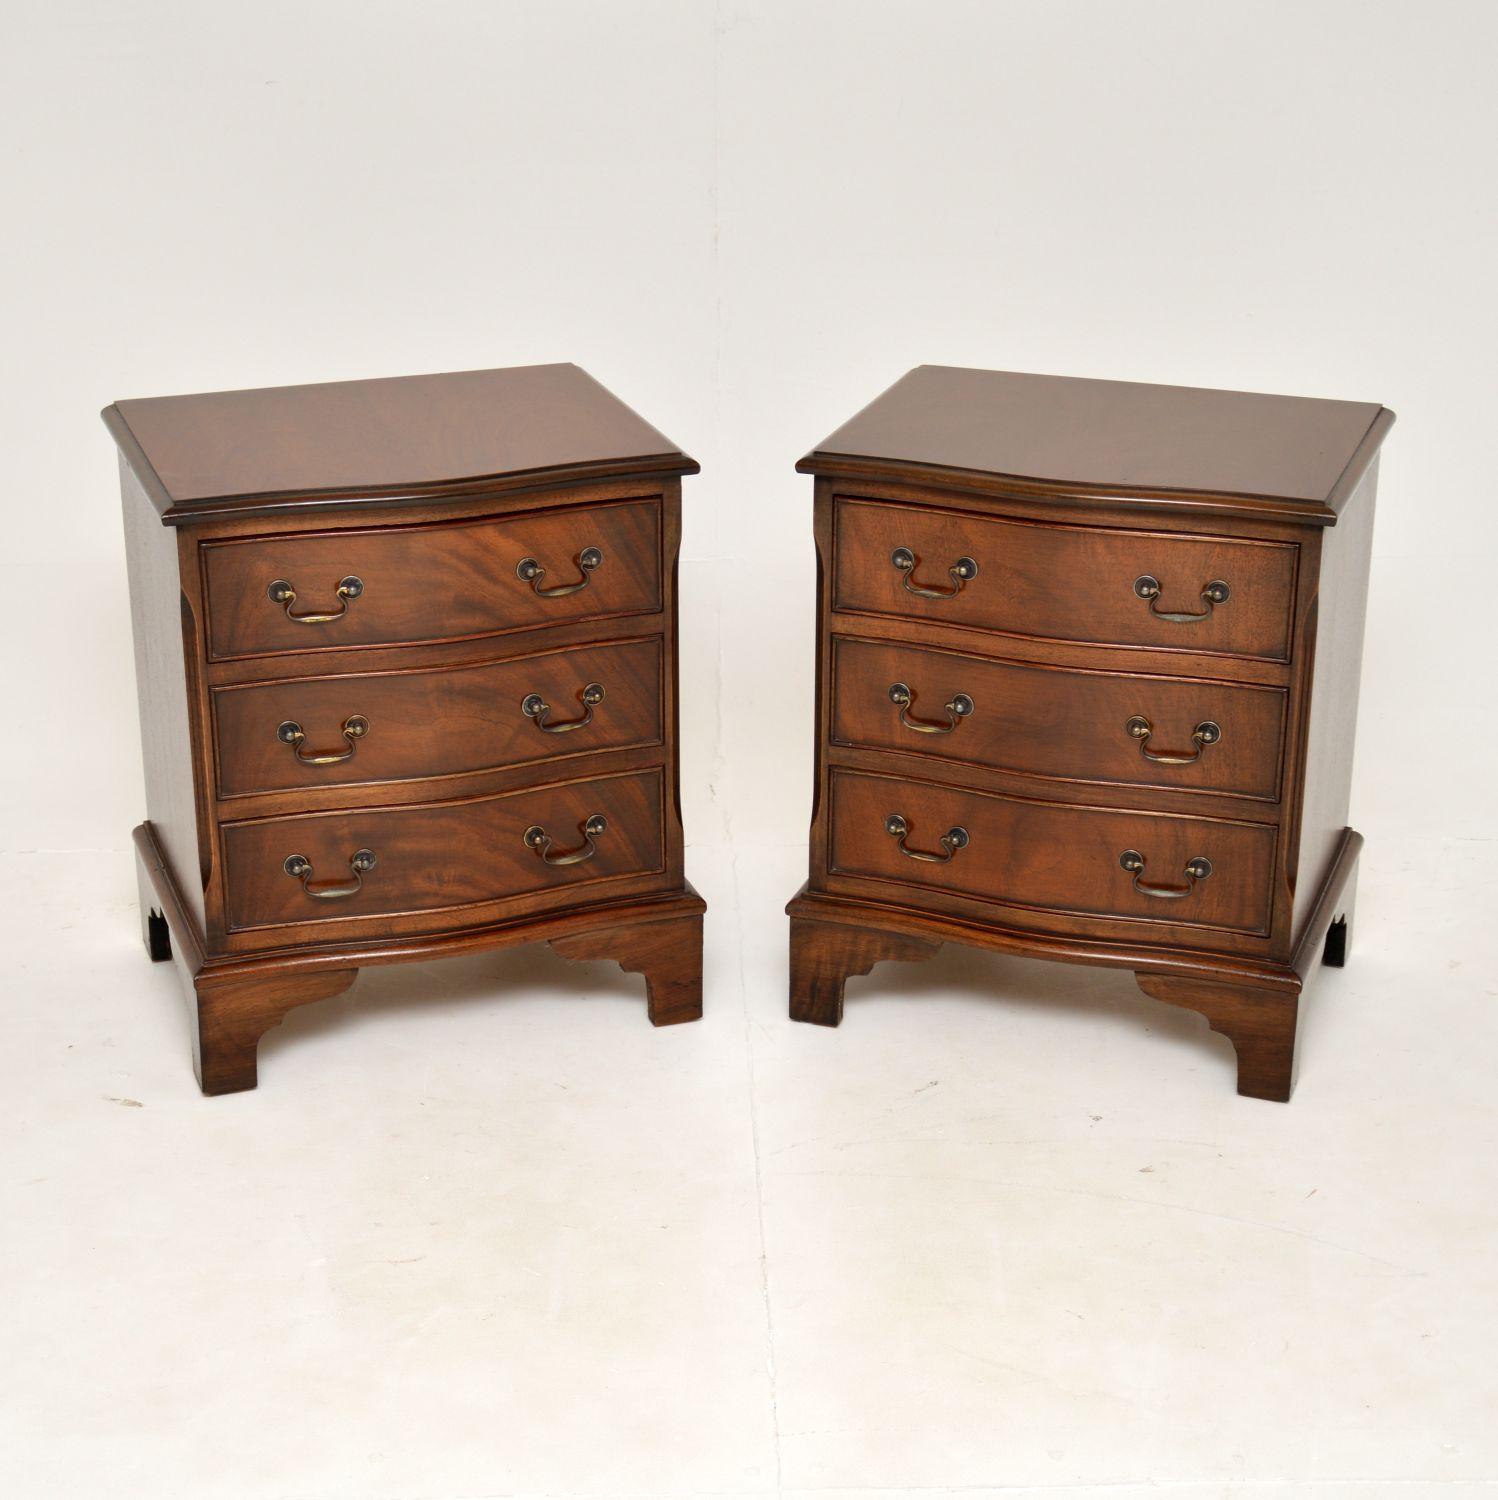 A smart and useful pair of antique bedside chests in the Georgian style. They were made in England, and date from around the 1930-50’s. The quality is fantastic, they are extremely well made and are a very useful size. The fronts have a serpentine